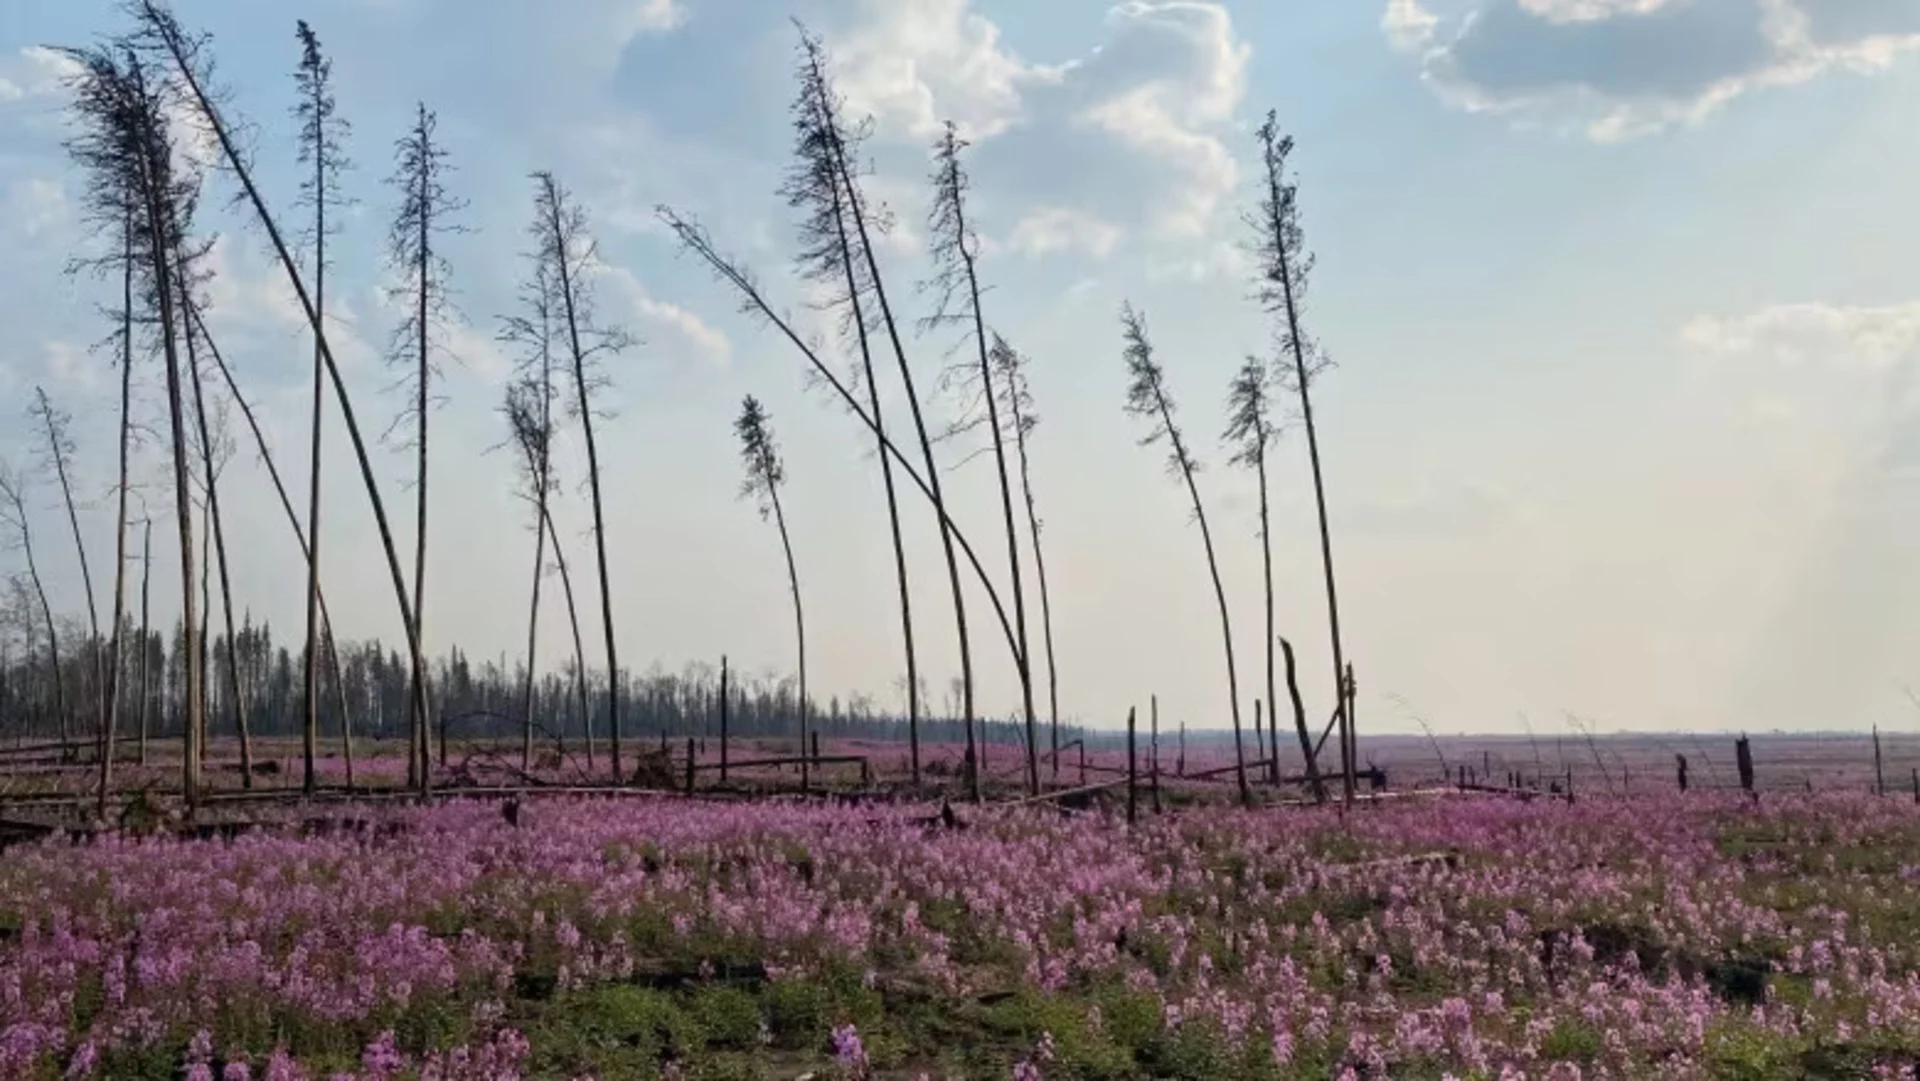 Meet the purple flower that thrives after wildfire — fireweed